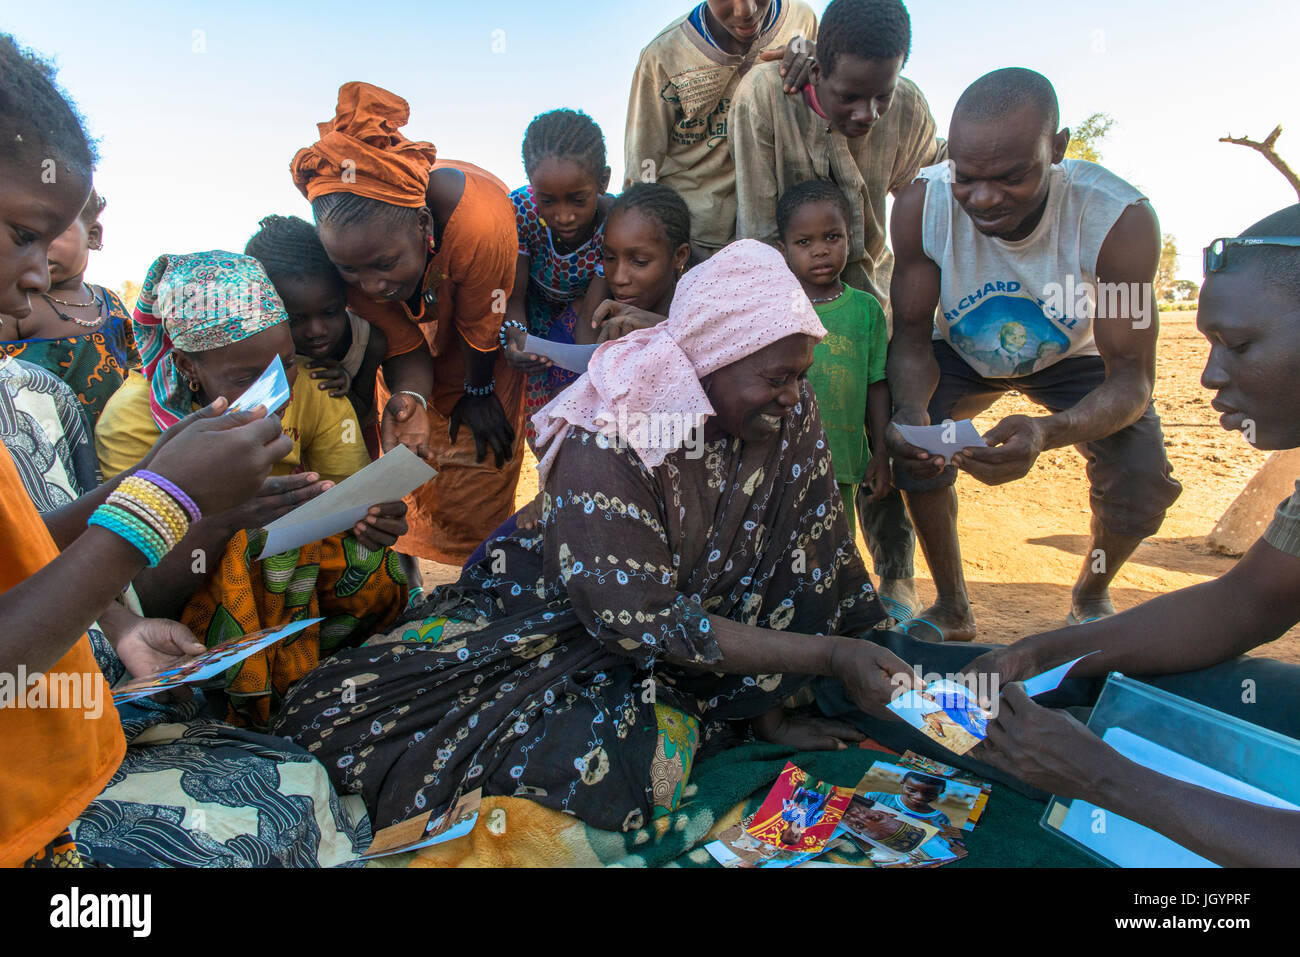 African villagers looking at photographs of themselves. Senegal. Stock Photo